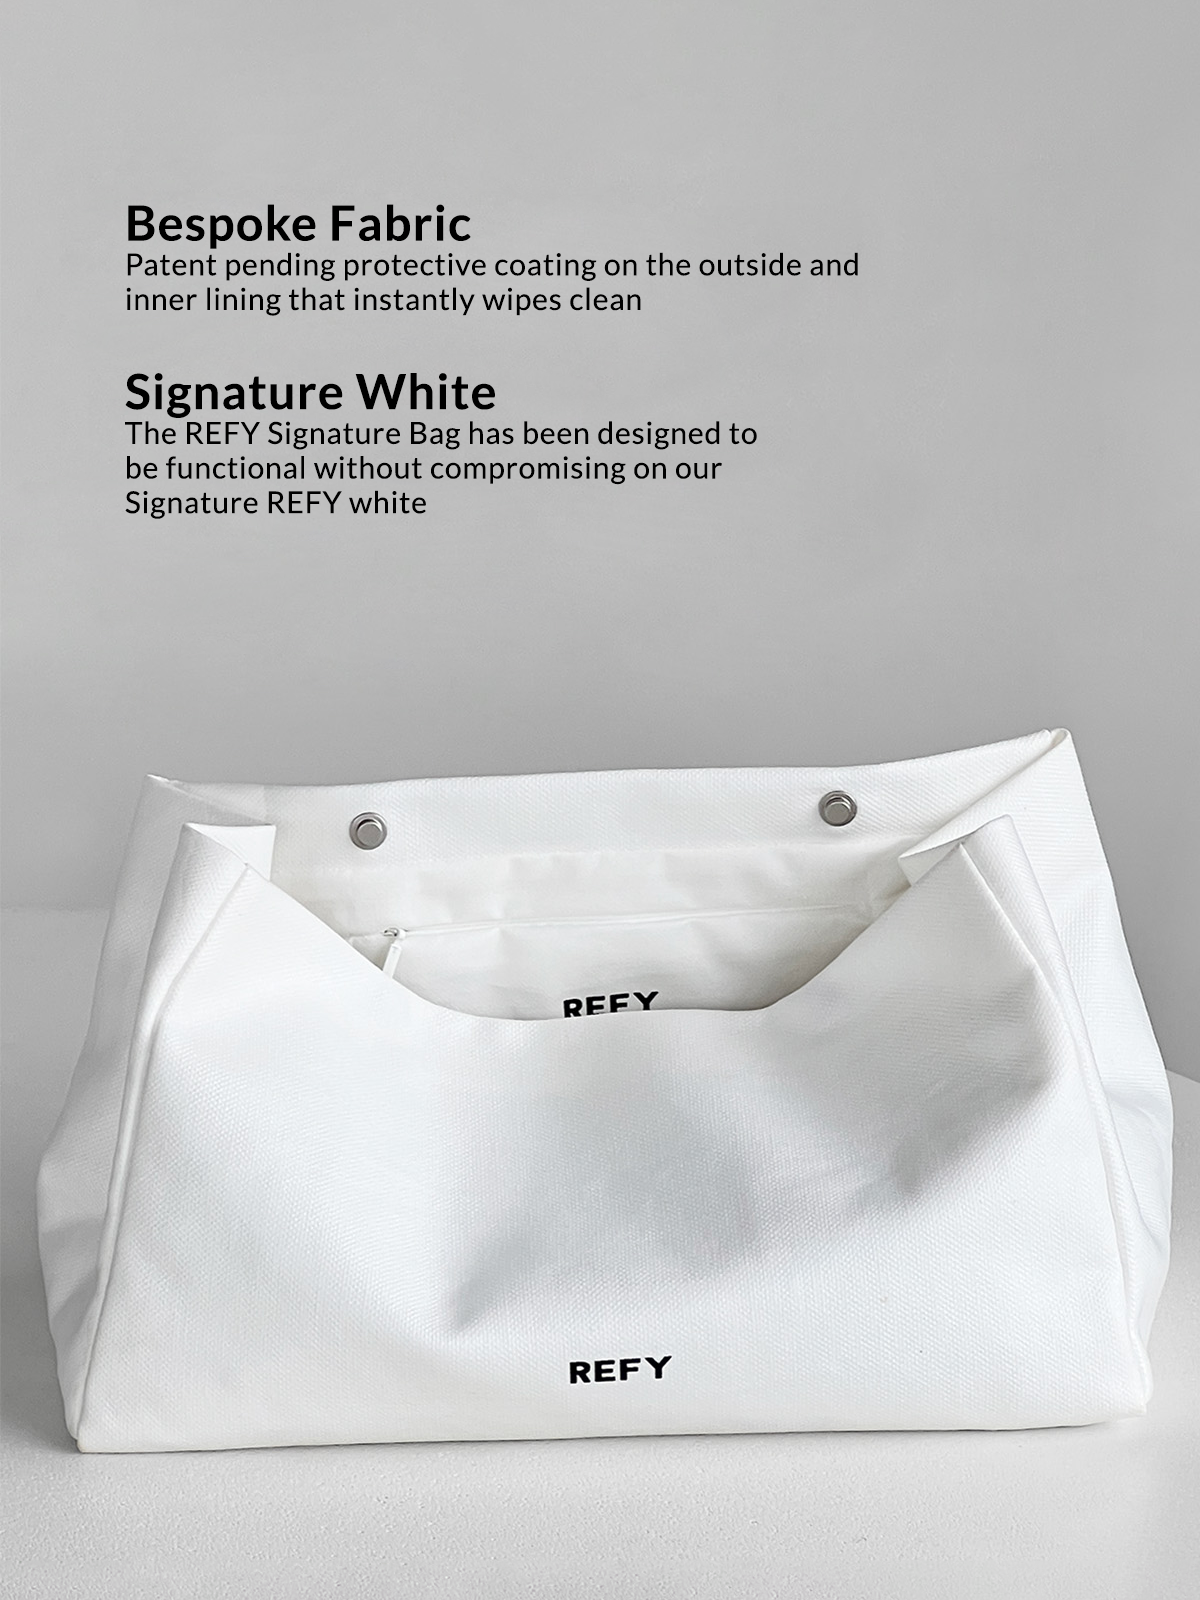 REFY SIGNATURE BAG USPS. MADE FROM BESPOKE FABRIC IN THE REFY SIGNATURE WHITE